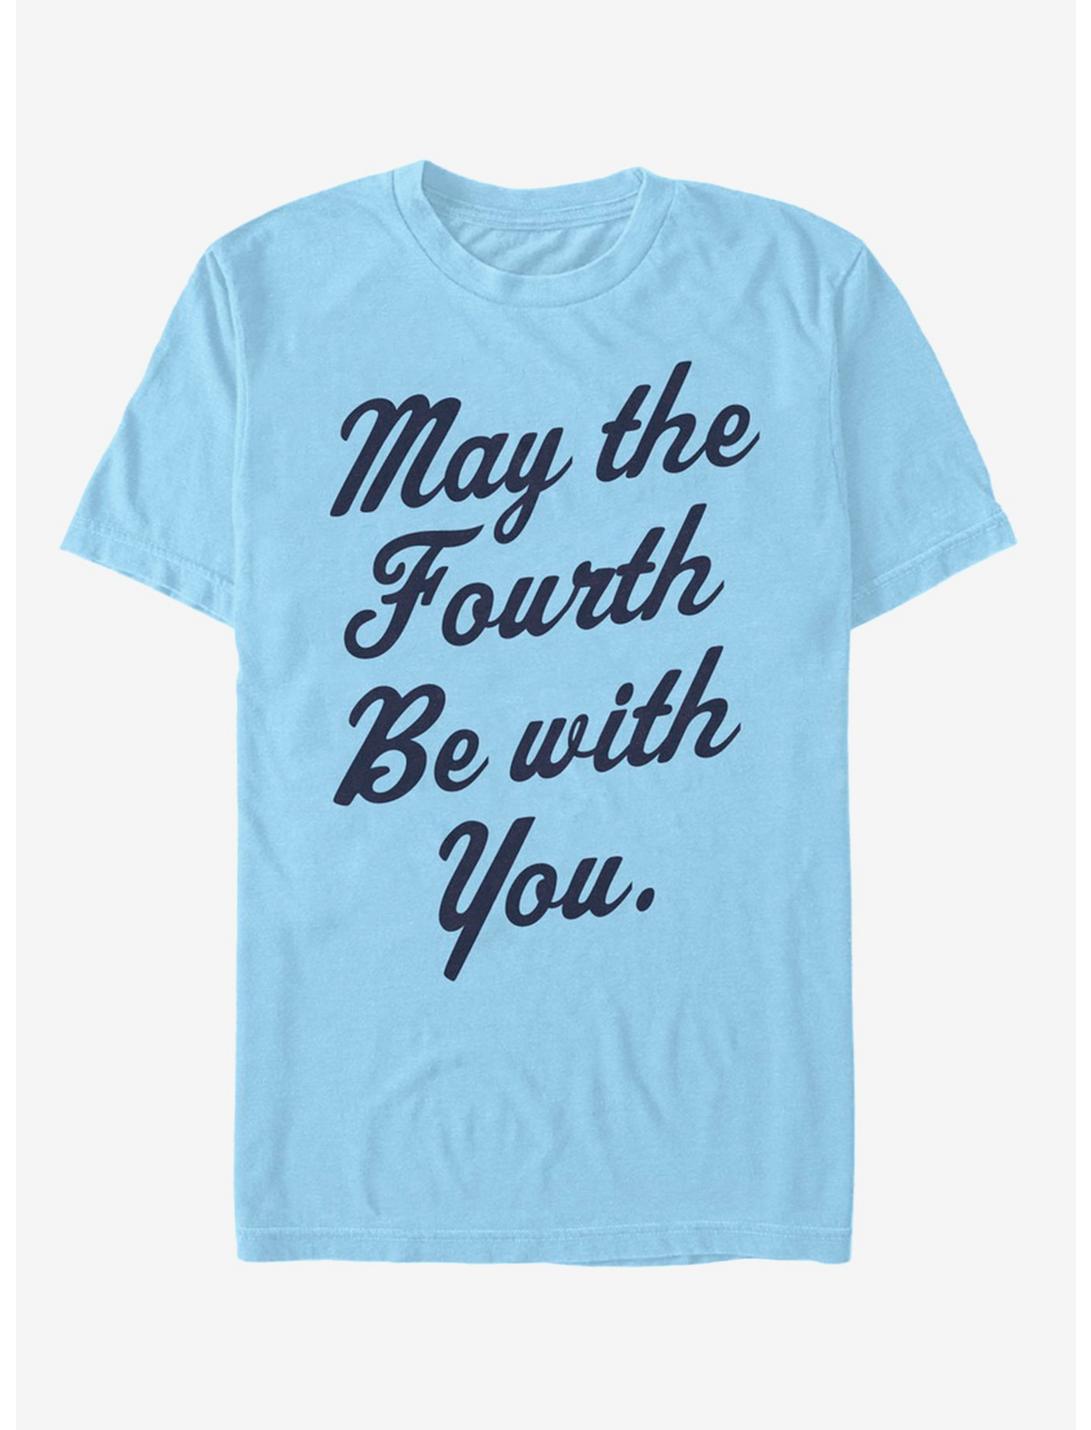 Star Wars Looking May the Fourth T-Shirt, LT BLUE, hi-res